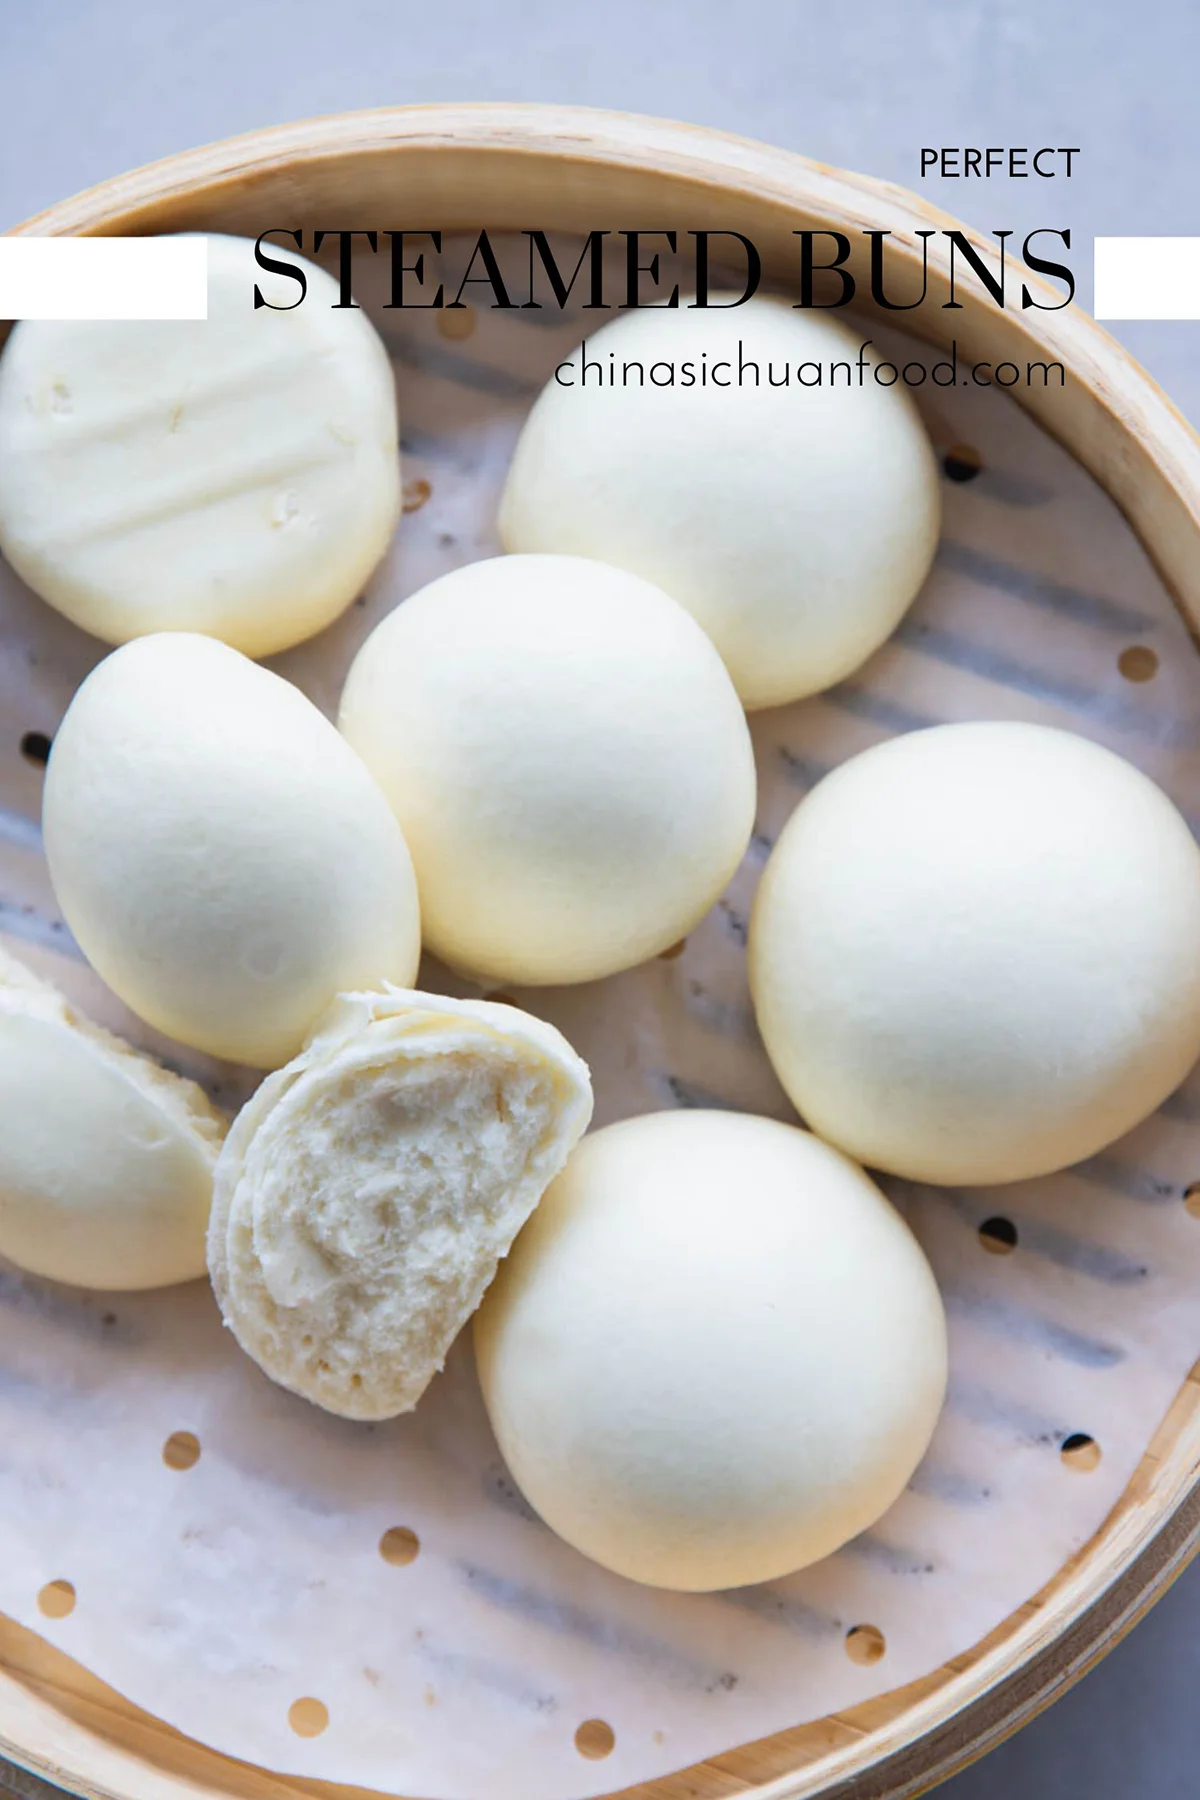 Chinese steamed buns|chinasichuanfood.com